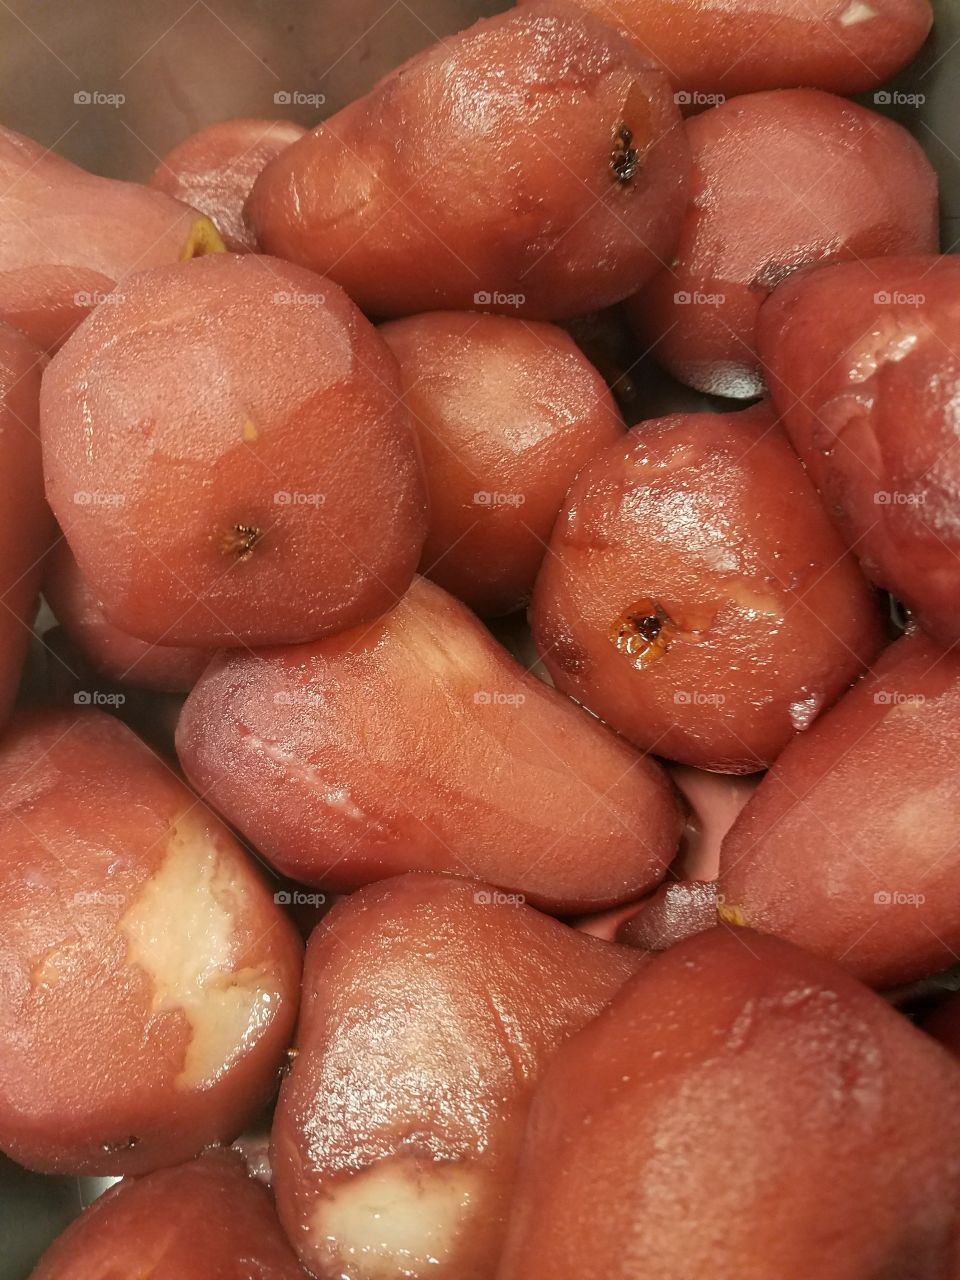 Red wine soaked pears